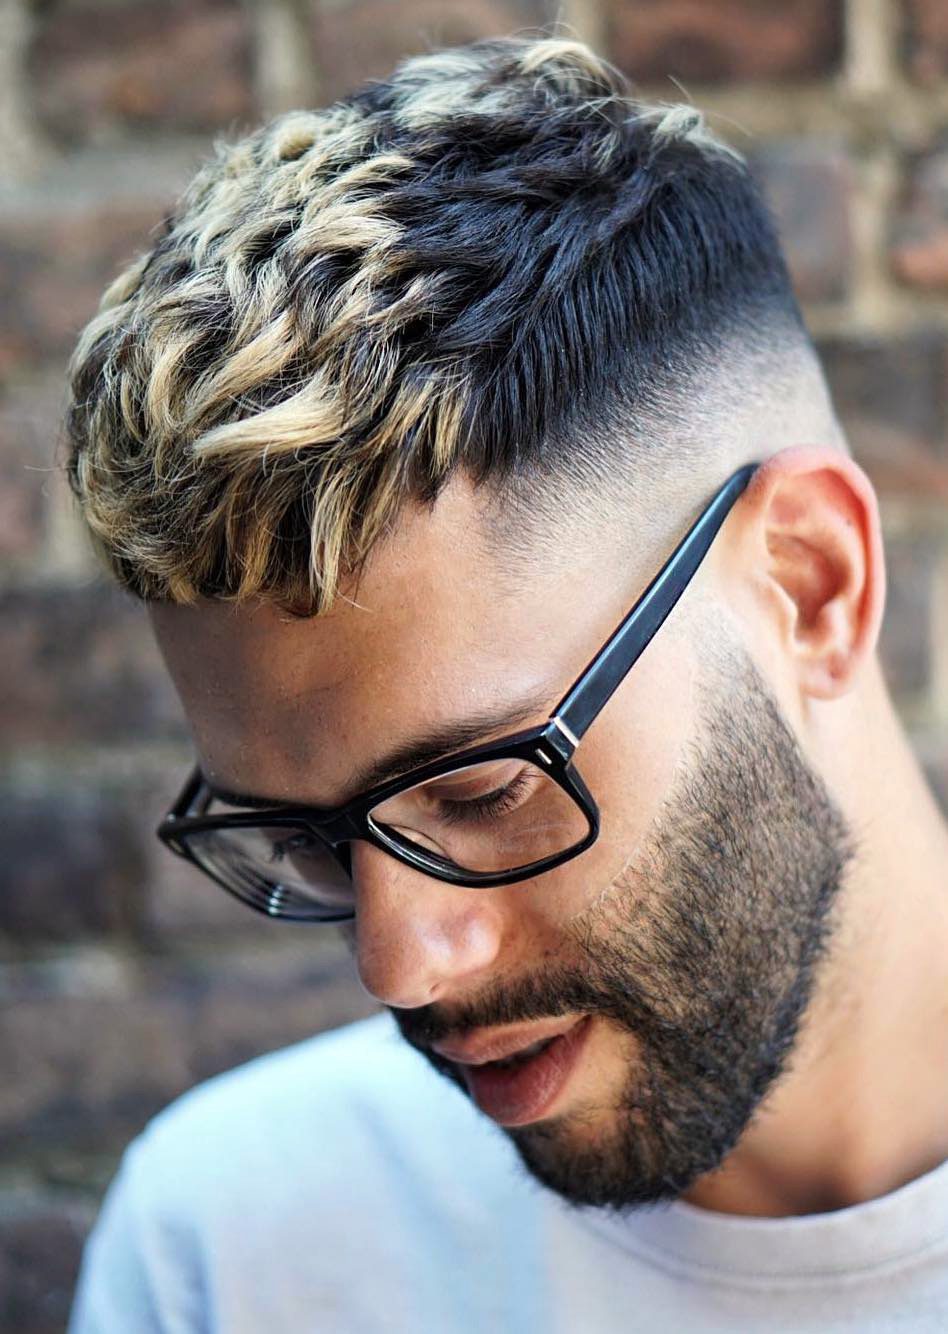 Check out our COMPLETE guide to men's hair styling. Includes 7 simple ways  to make your hairstyle be… | Men hair color, Men hair color highlights,  Trendy hair color